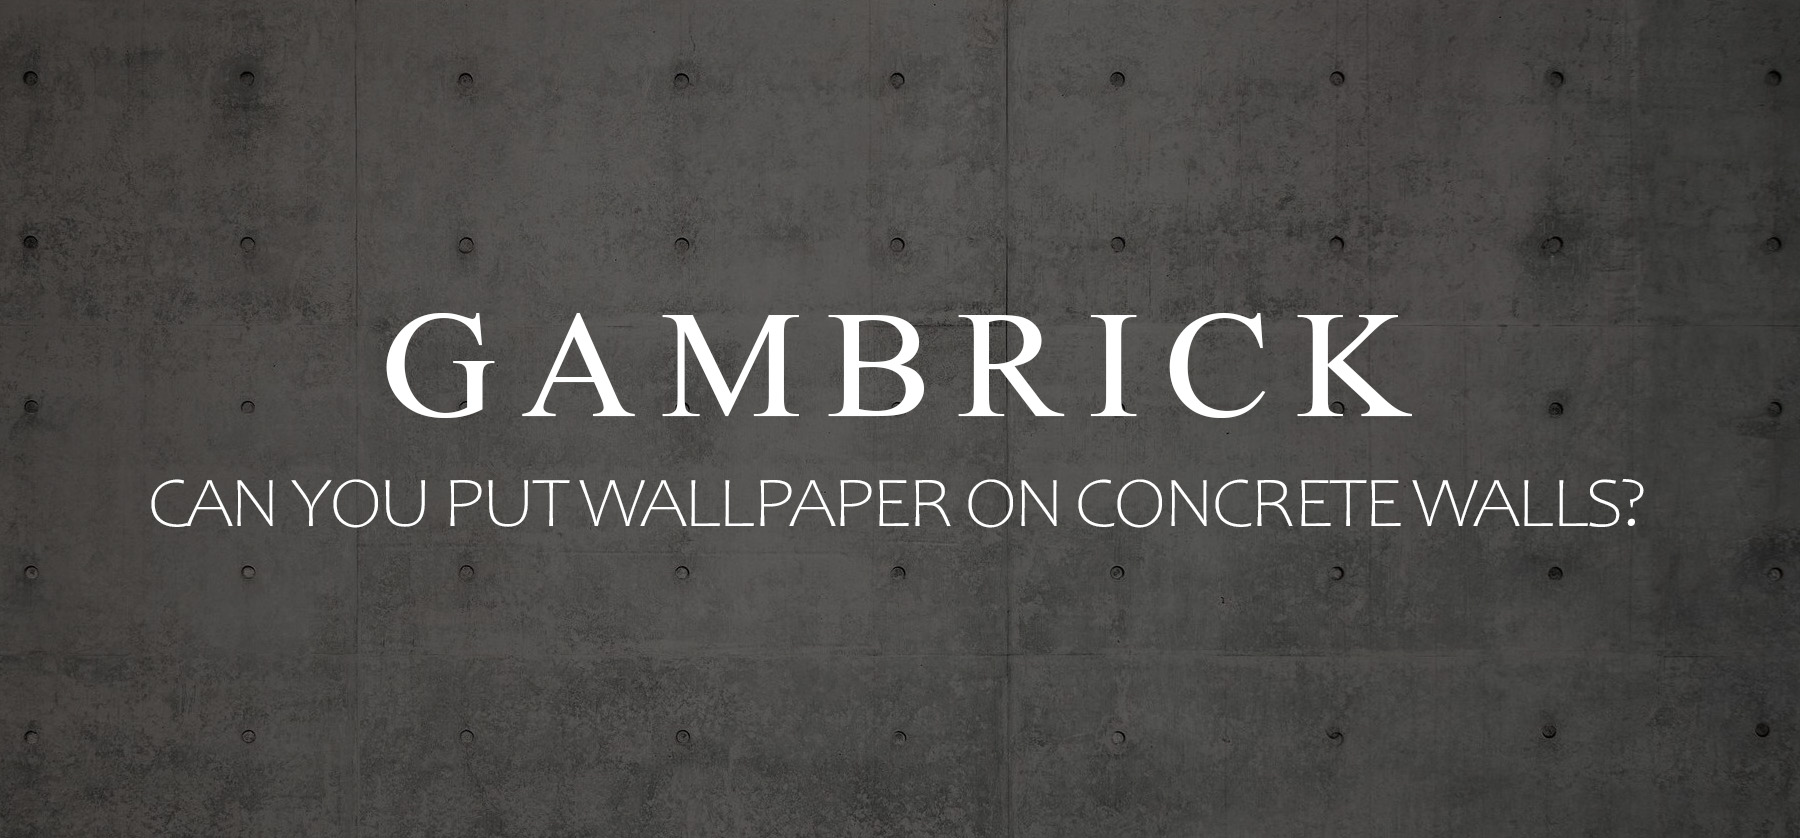 Can You Put Wallpaper On Concrete Walls Banner 1.1